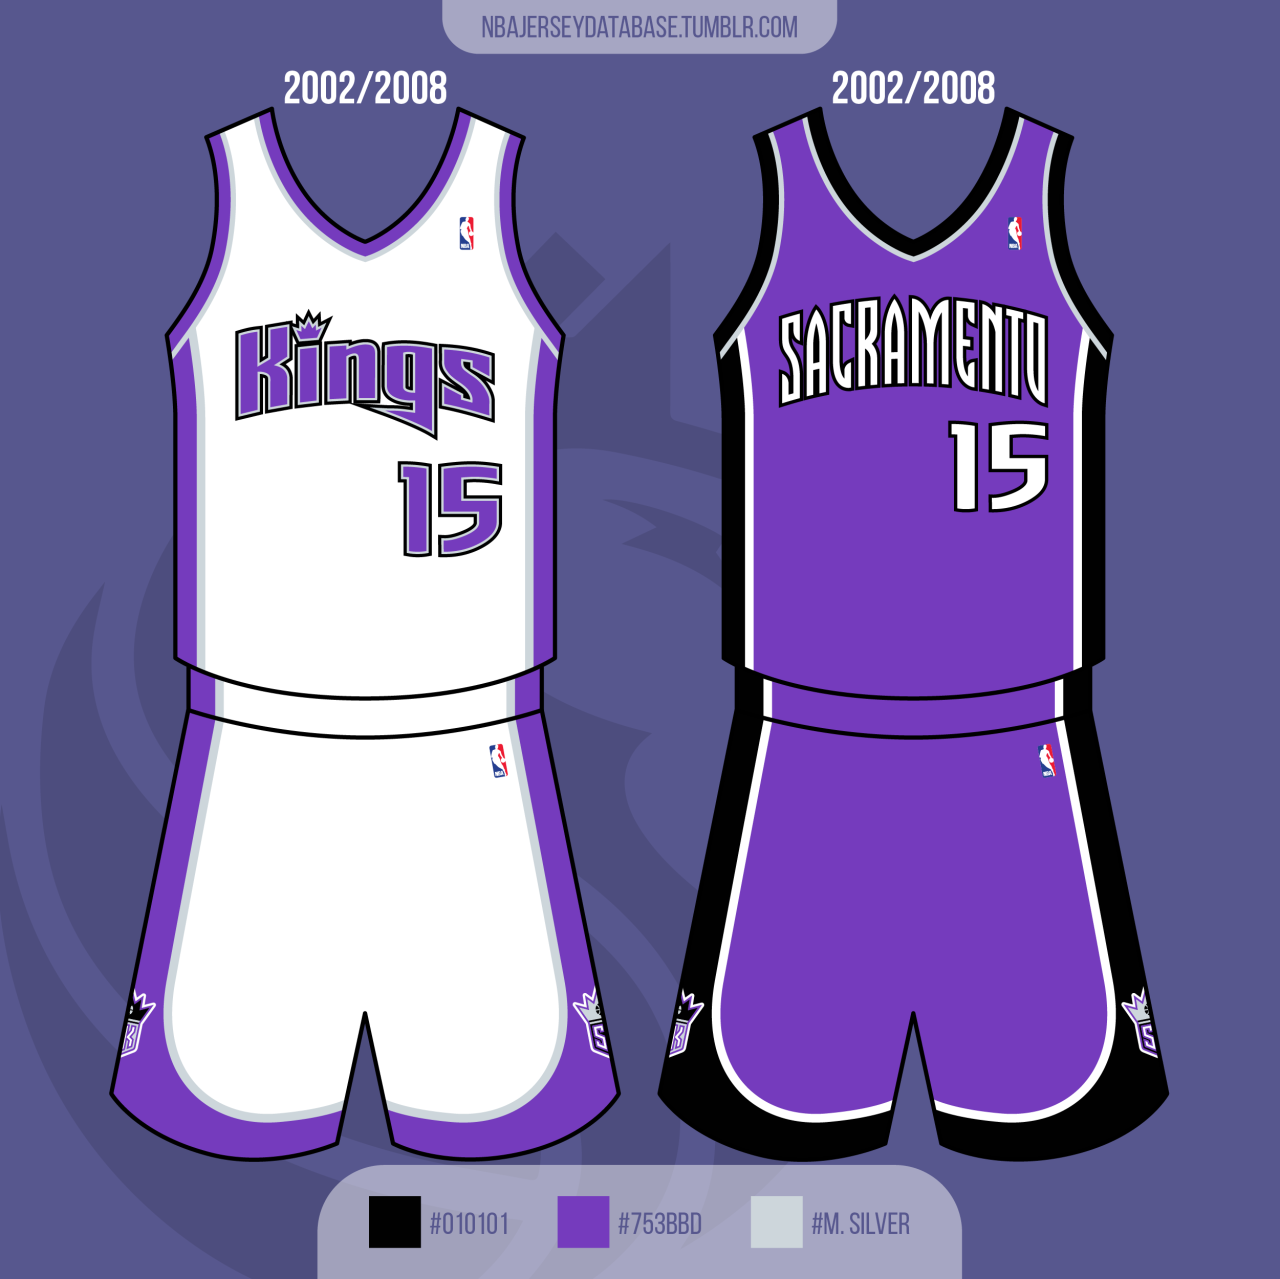 NBA Jersey Database, Sacramento Kings 1999-2002 Record (with just